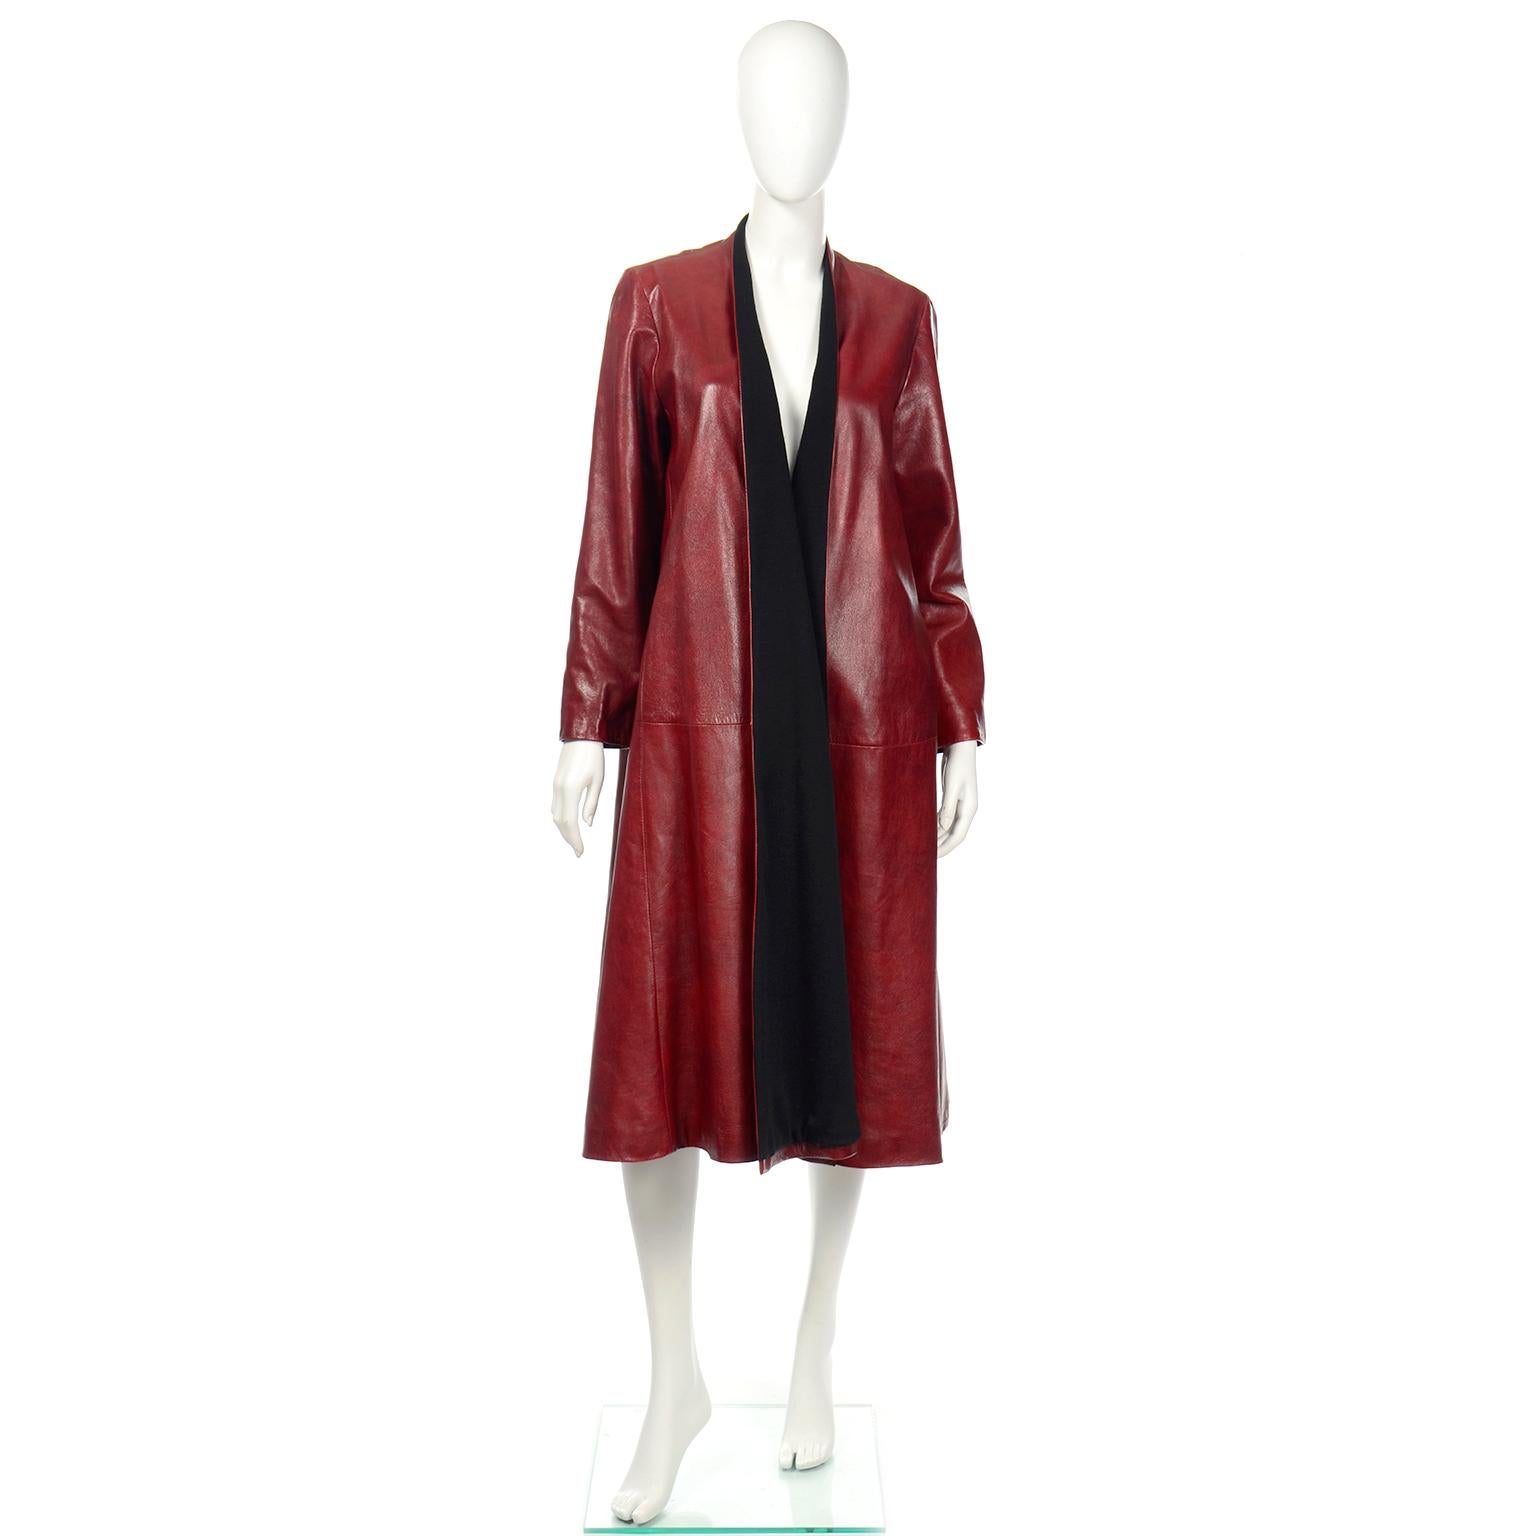 This is a sublime 1990's Donna Karan vintage cordovan leather swing coat with black wool lining and silk lined pockets. We love vintage Donna Karan pieces and are always impressed with the quality of construction and materials. Those are things that